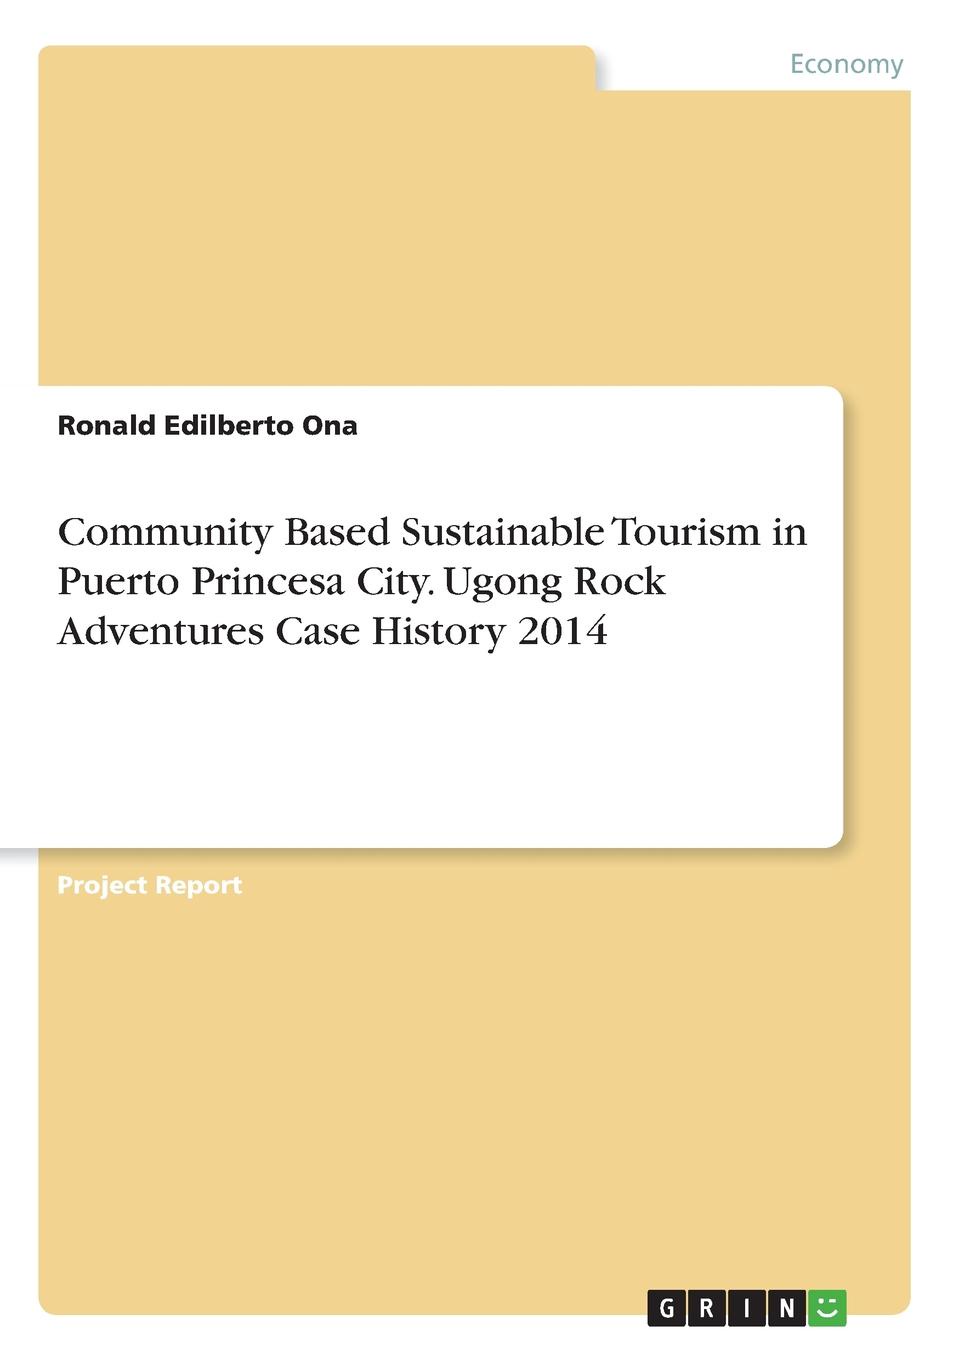 Community Based Sustainable Tourism in Puerto Princesa City. Ugong Rock Adventures Case History 2014